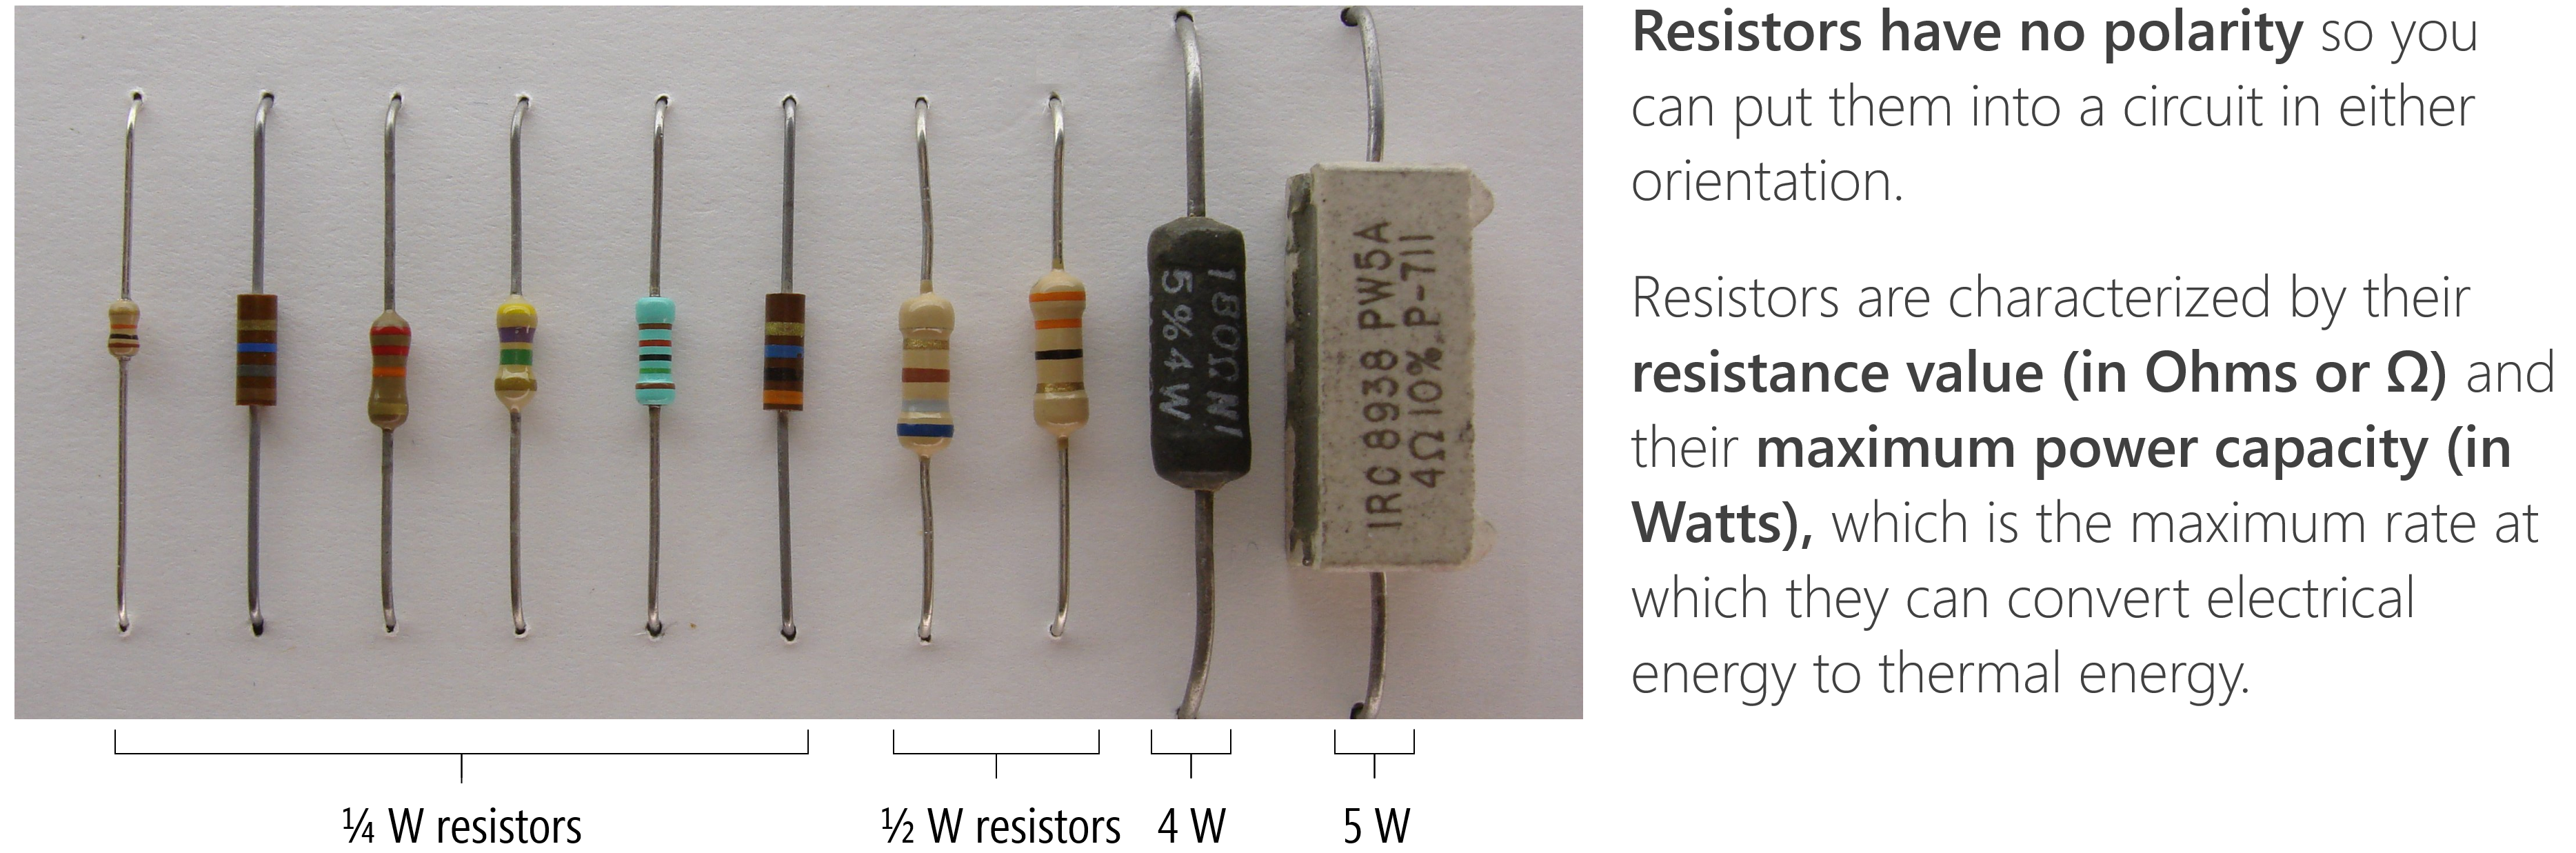 An image of multiple resistors showing 1/4W resistors, 1/2W resistors, and 4W and 5W resistors. Typically, resistors with higher power capacity ratings are bigger